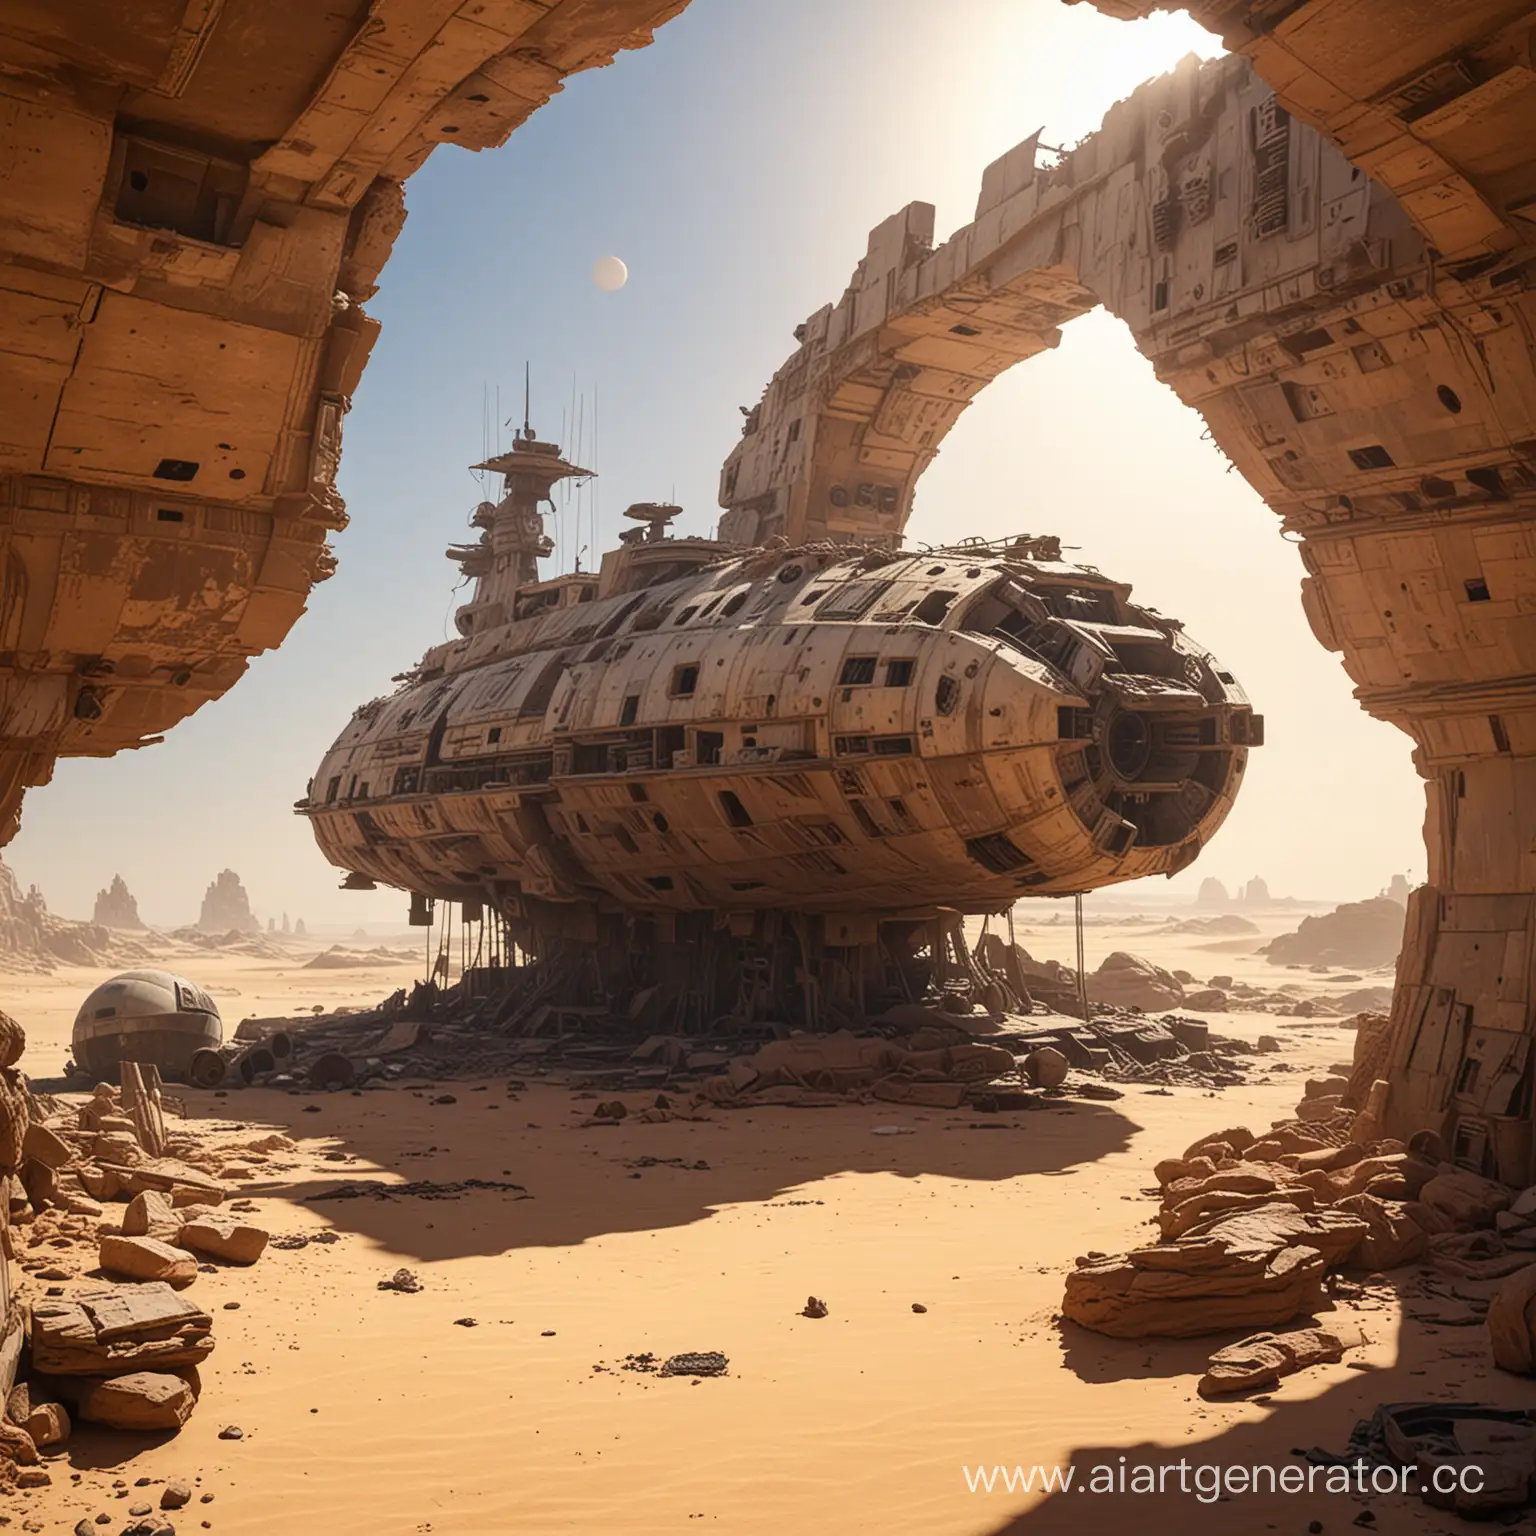 Sunset-on-Tatooine-Exploring-the-Ruins-of-the-Empires-Ships